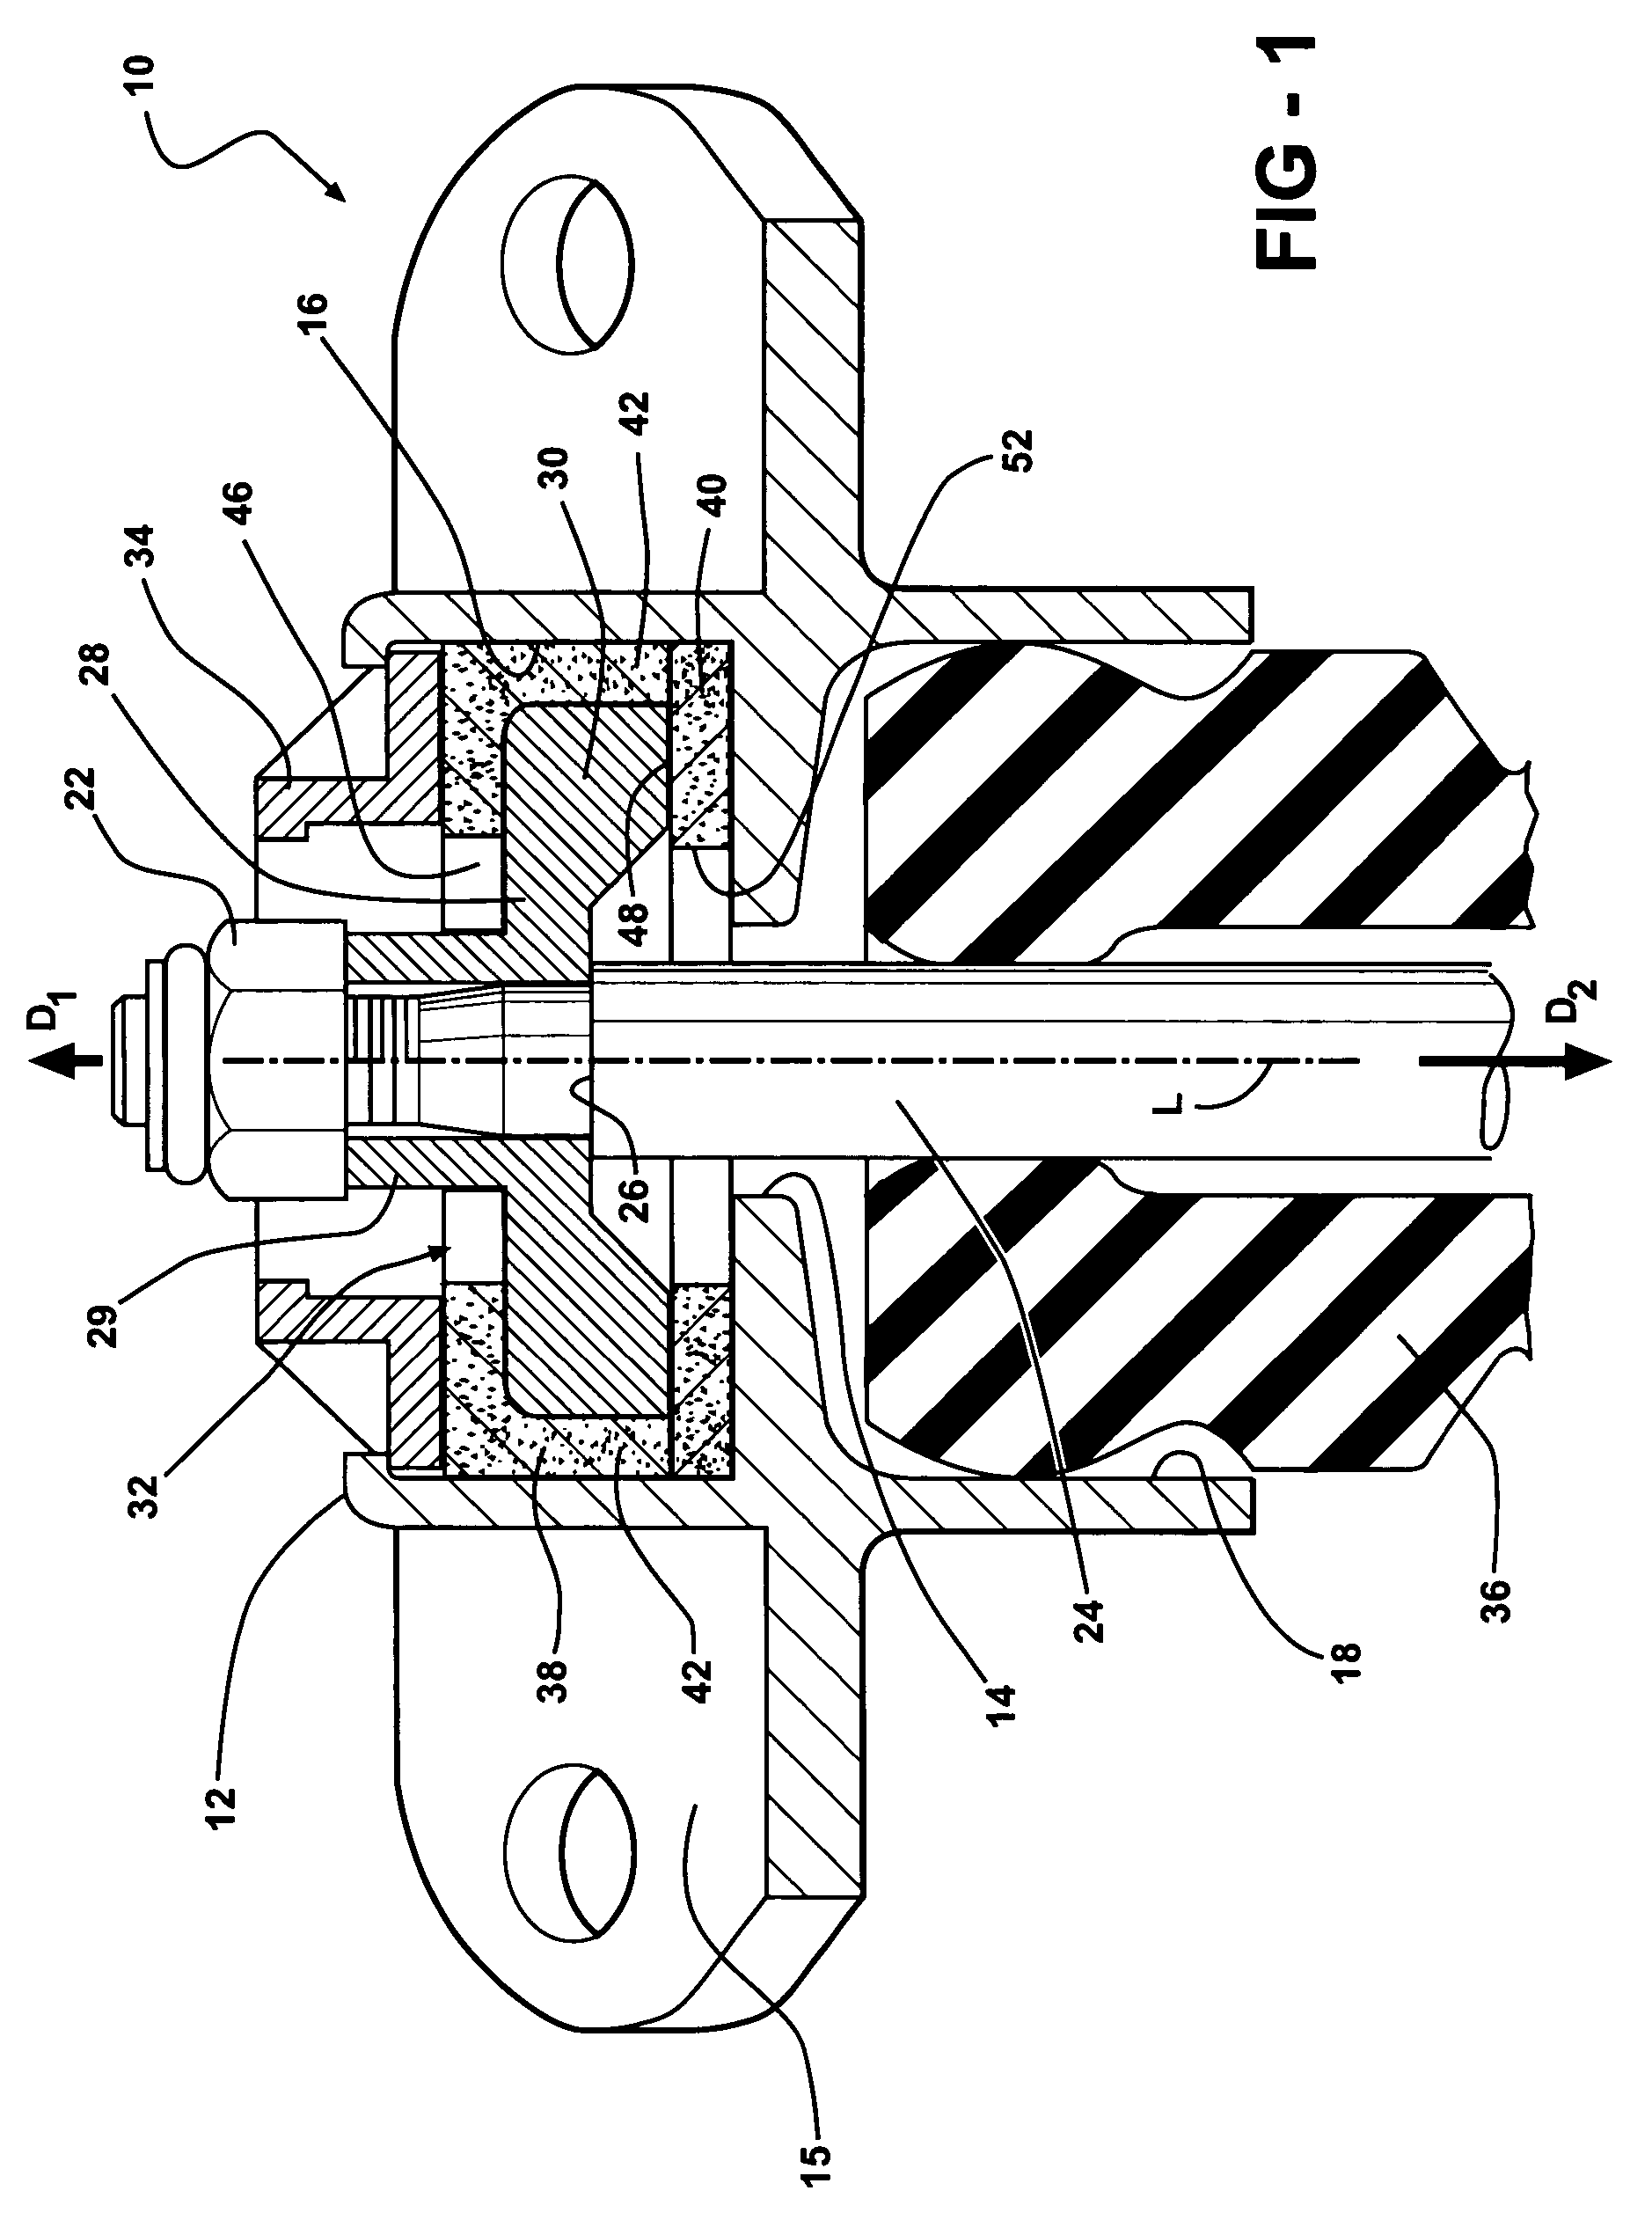 Mounting assembly for a vehicle suspension component